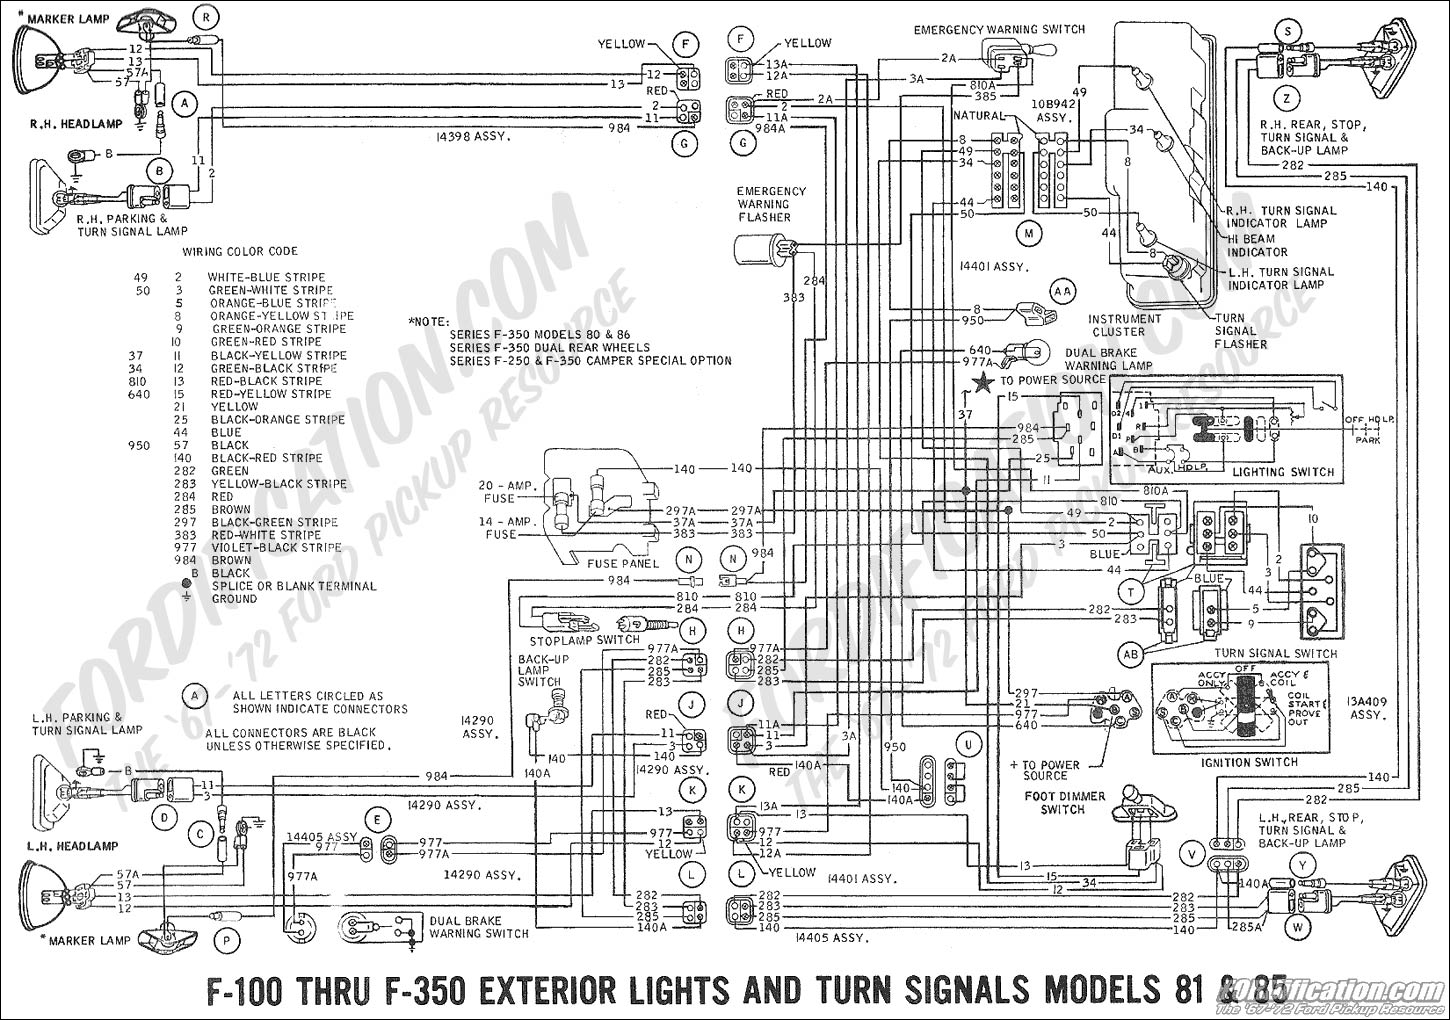 1983 Ford F250 Wiring Diagram from www.fordification.com